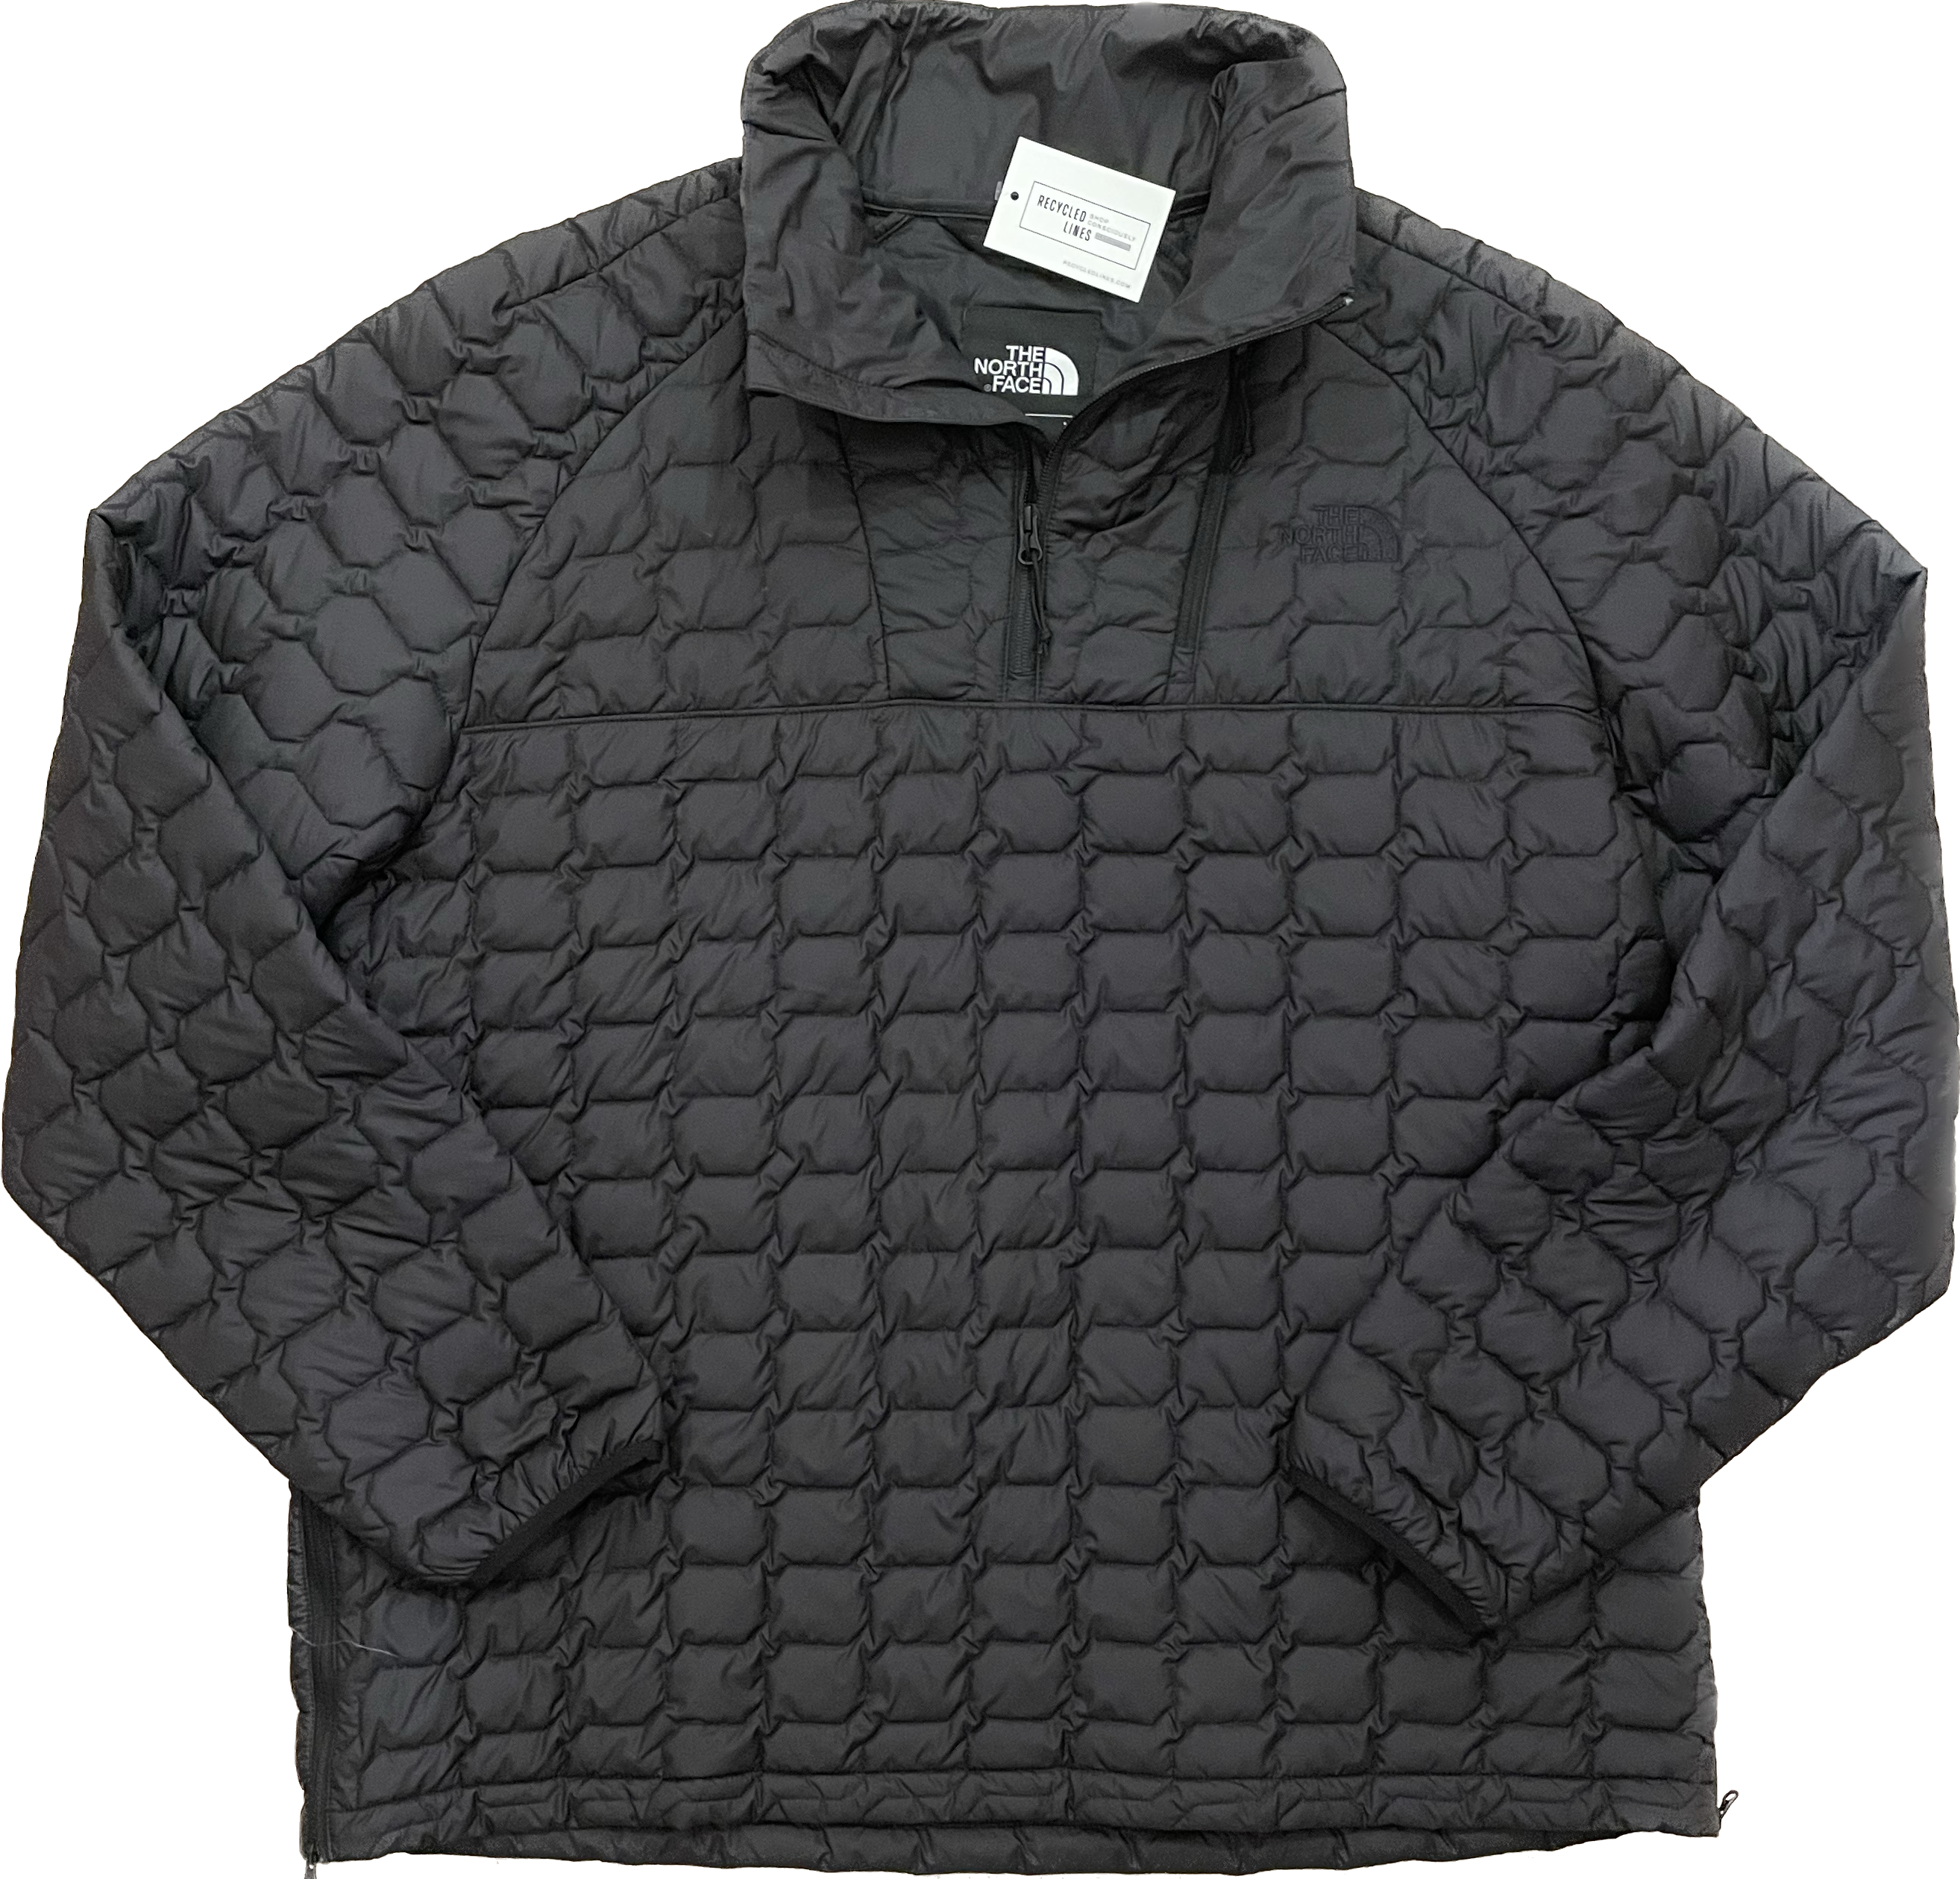 The North Face 1/4 Zip Puffer Jacket, Black Mens Size XXL